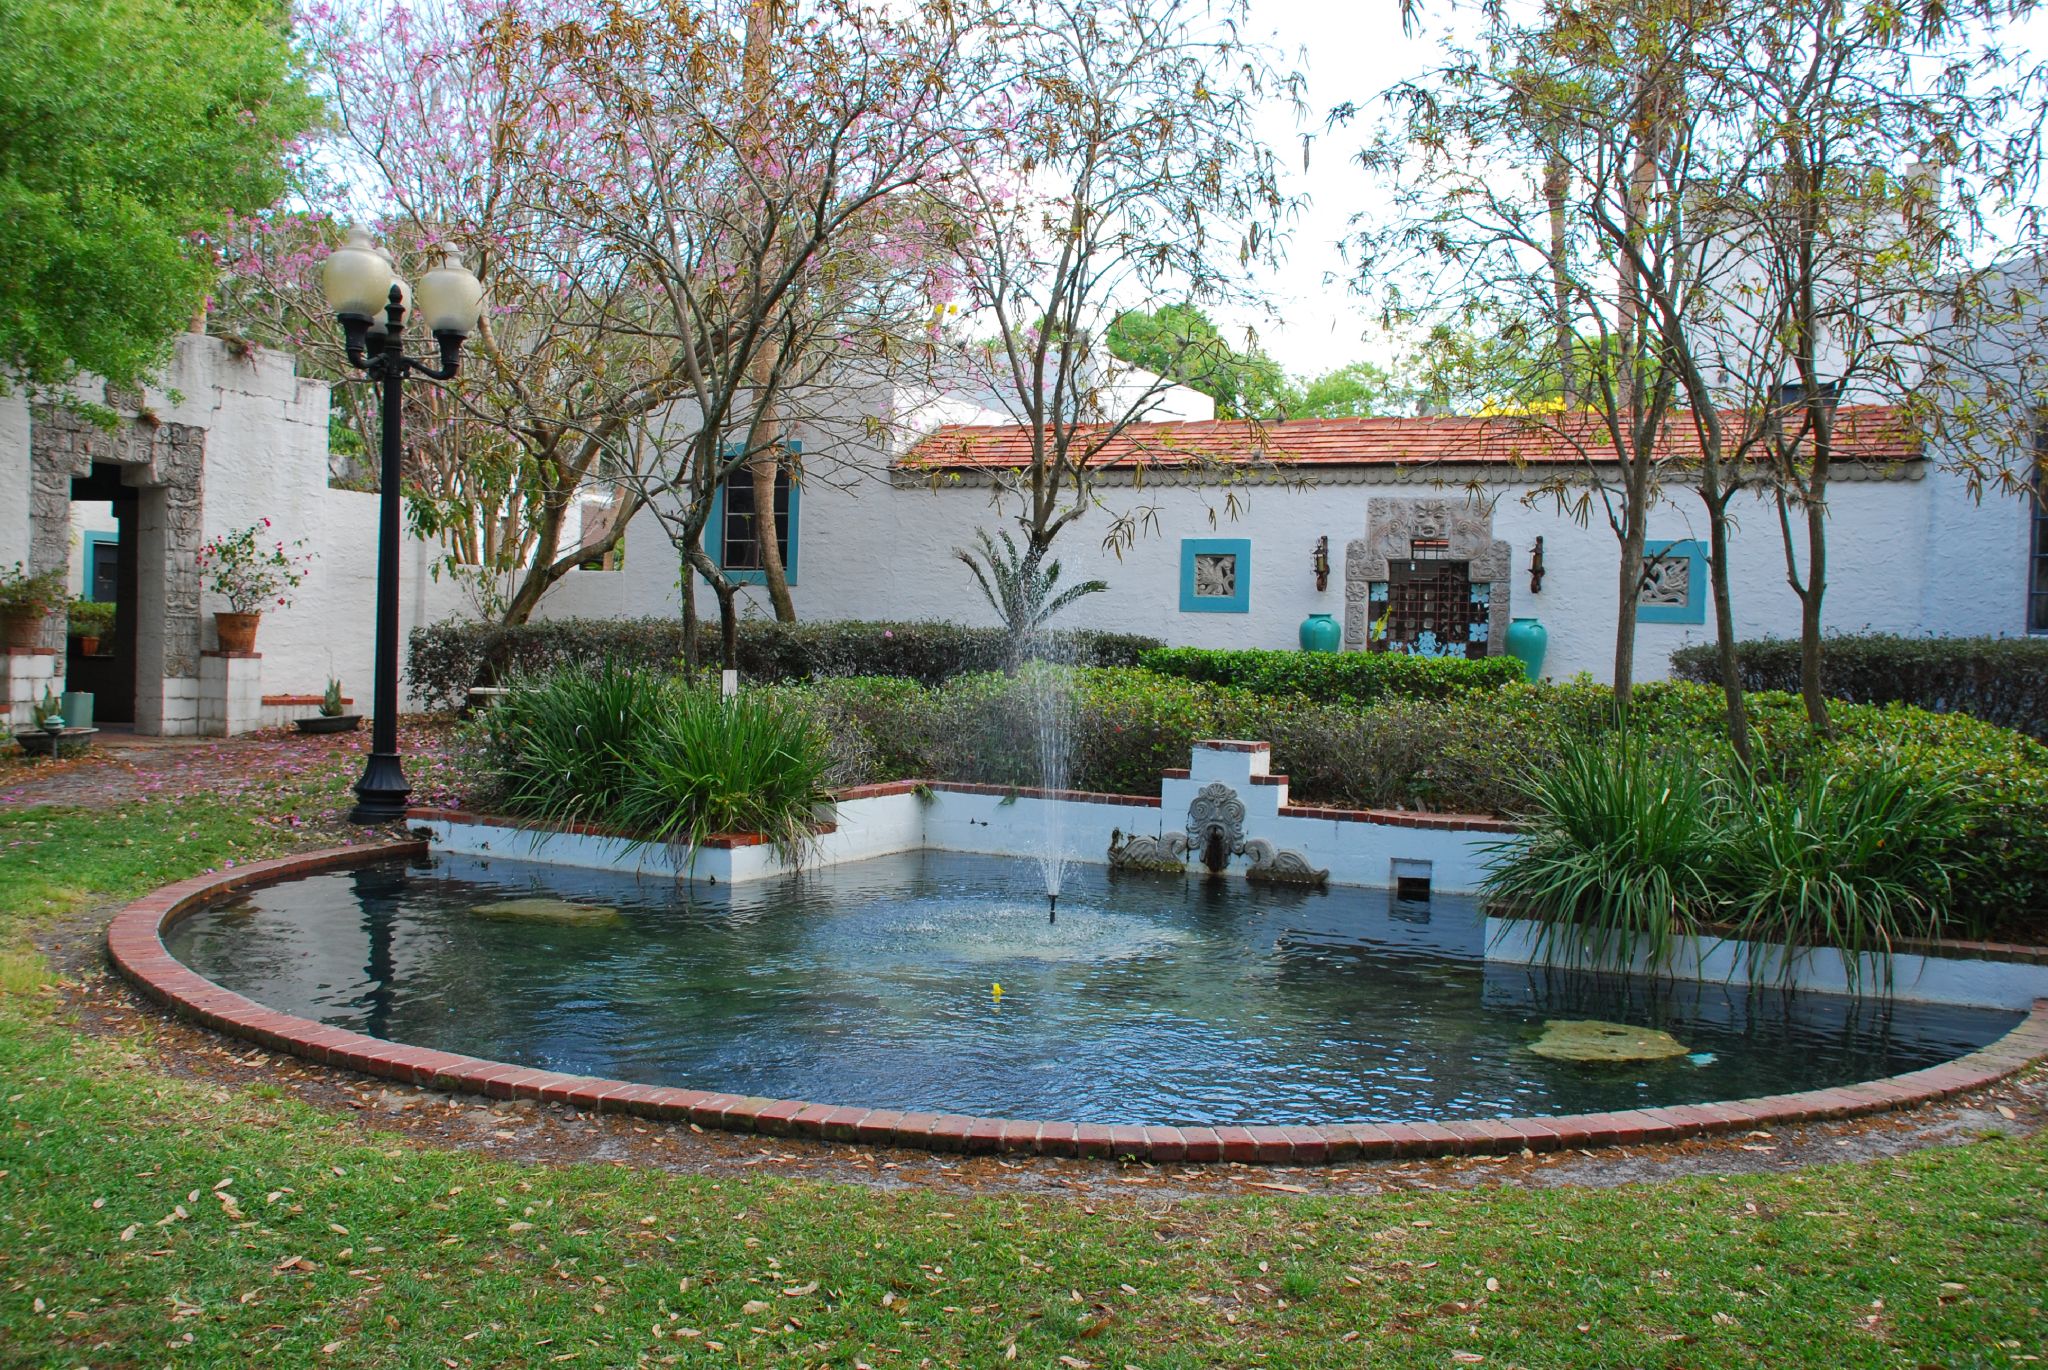 A semi-circular fountain in the foreground, with water spraying straight up. Behind, the adobe museum building: single-story, whitewashed, with a red tile roof.